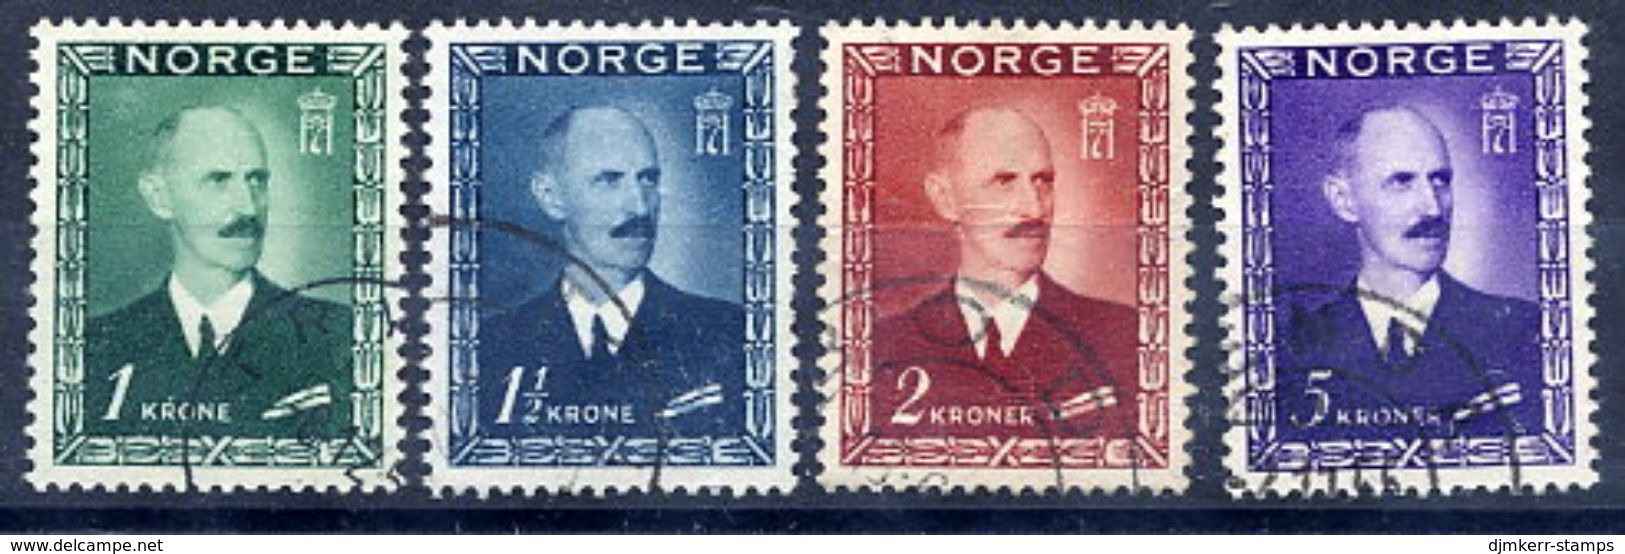 NORWAY 1946 King Haakon VII Definitive Kroner Values, Used.  SG380-83, Michel 315-18 - Used Stamps